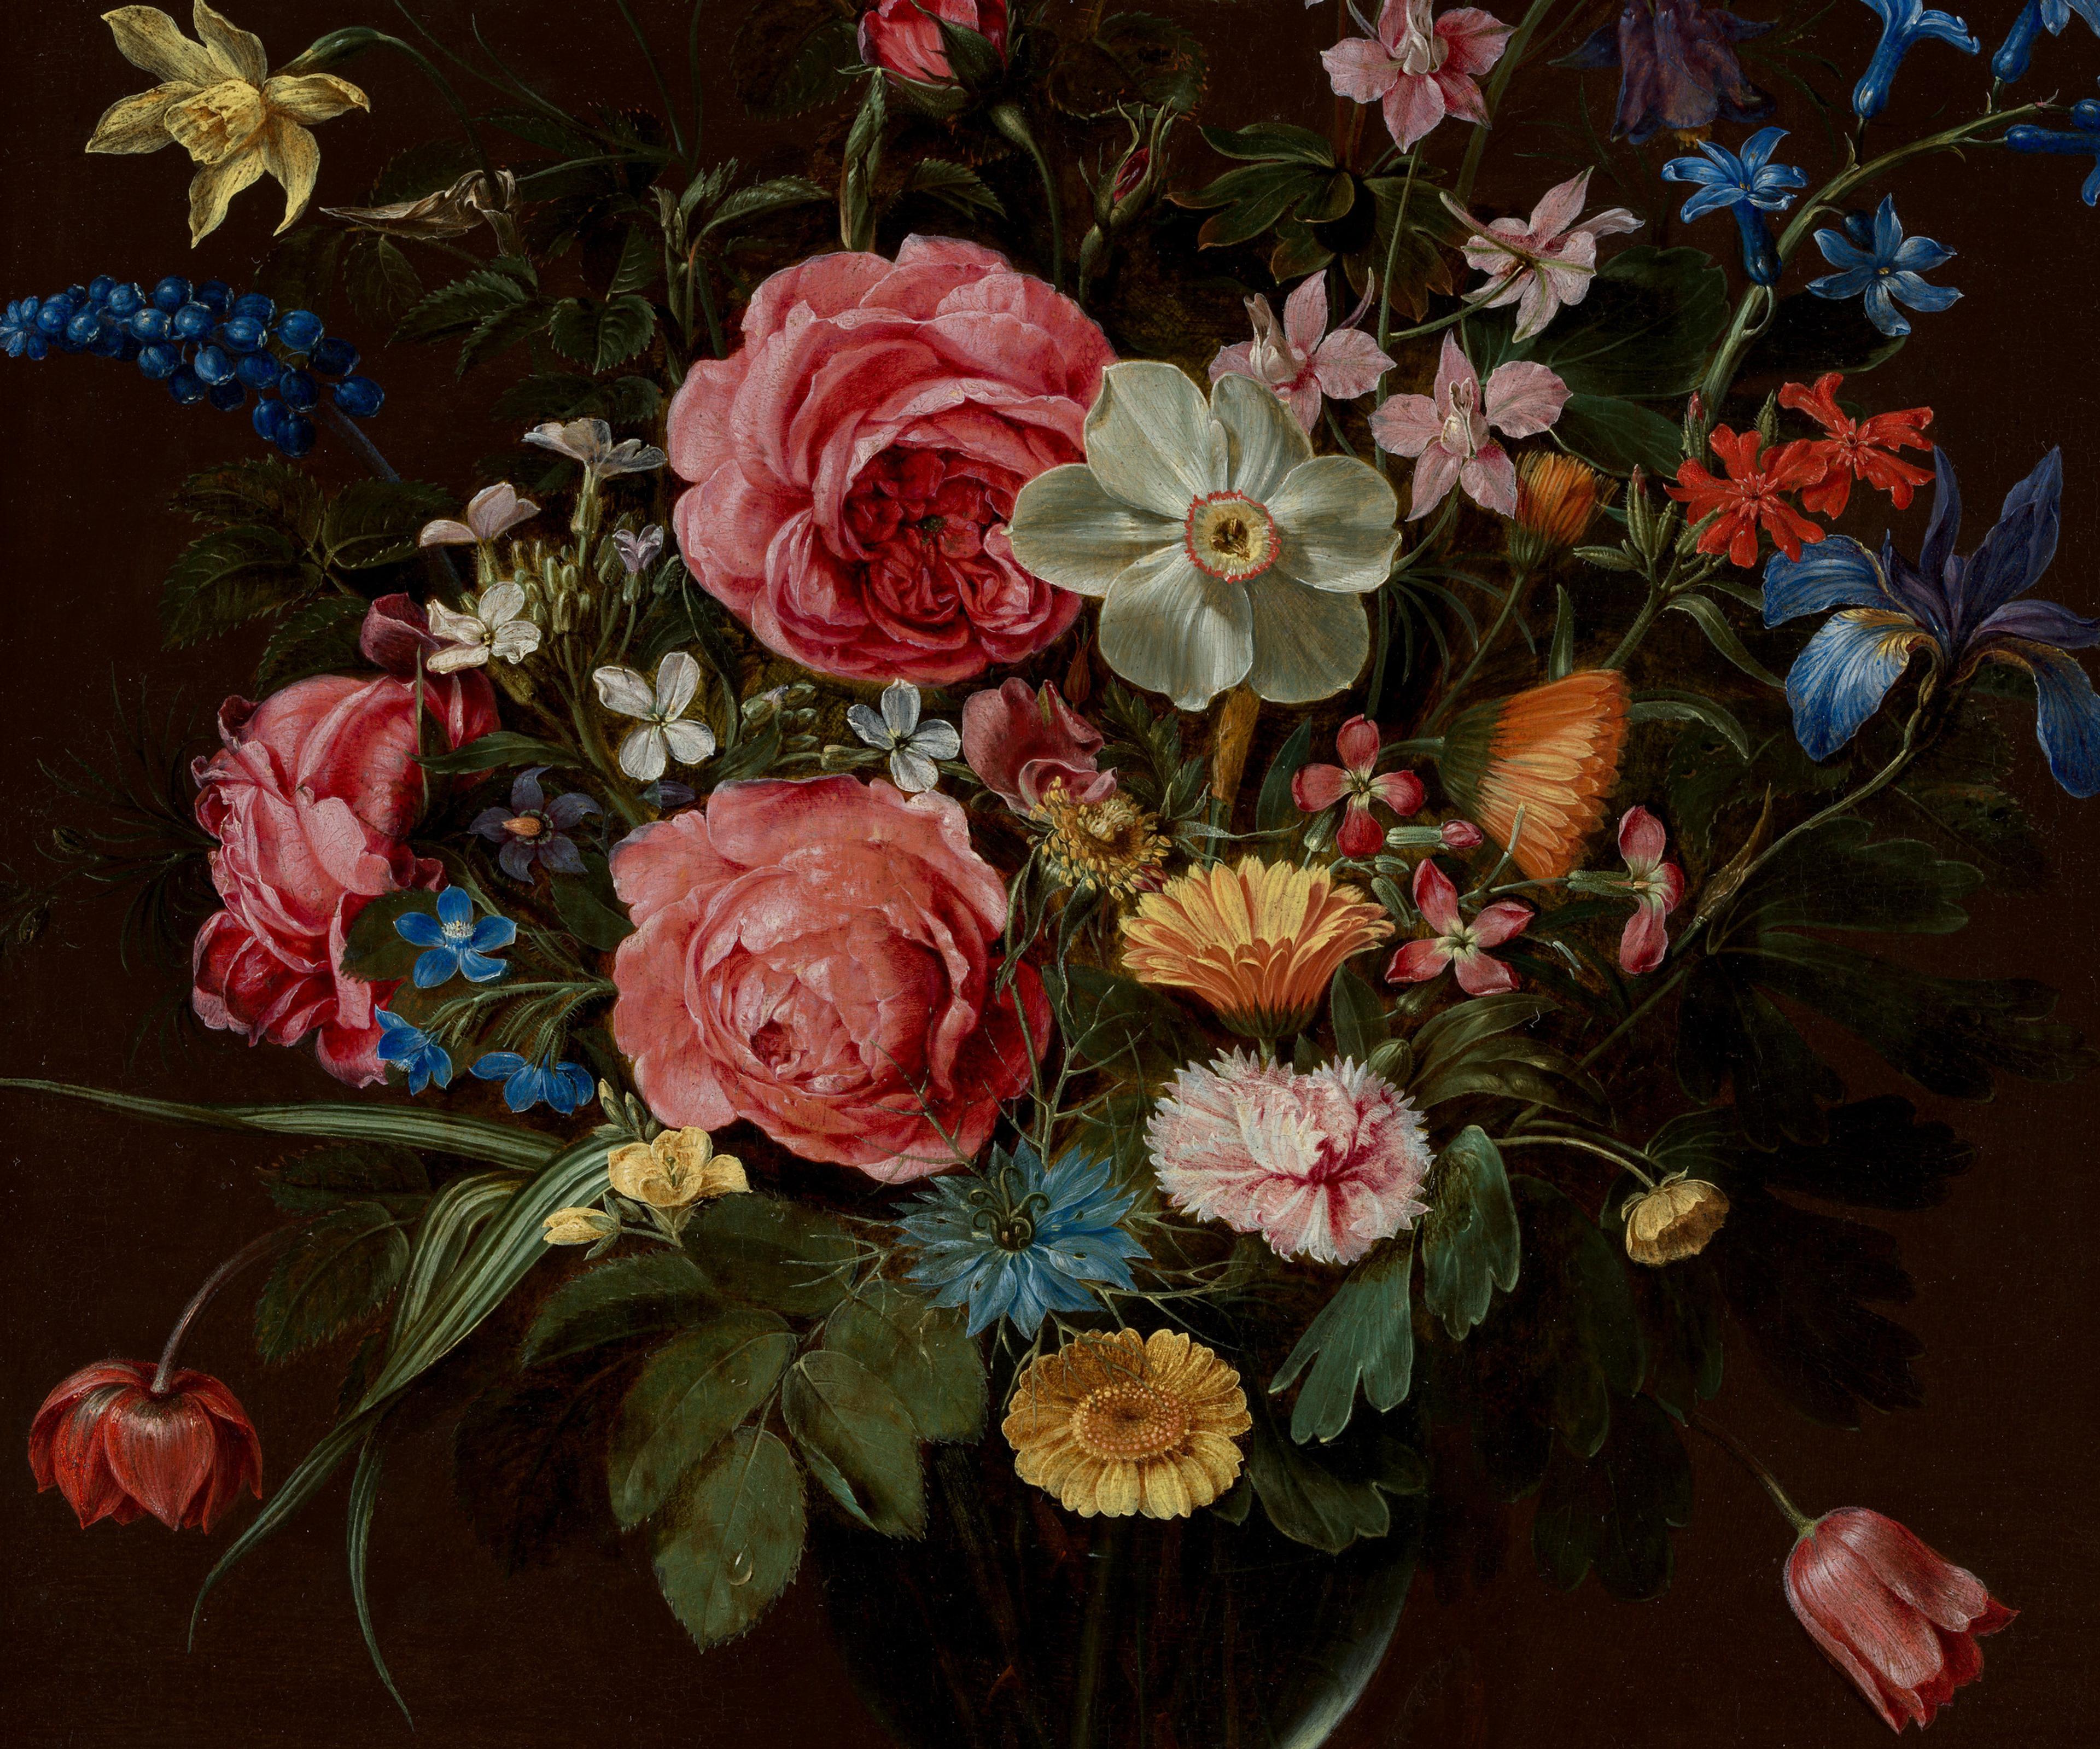 Detail of Clara Peeter's "A Bouquet of Flowers" an oil painting depicting a vibrant, multi-colored bouquet of flowers.